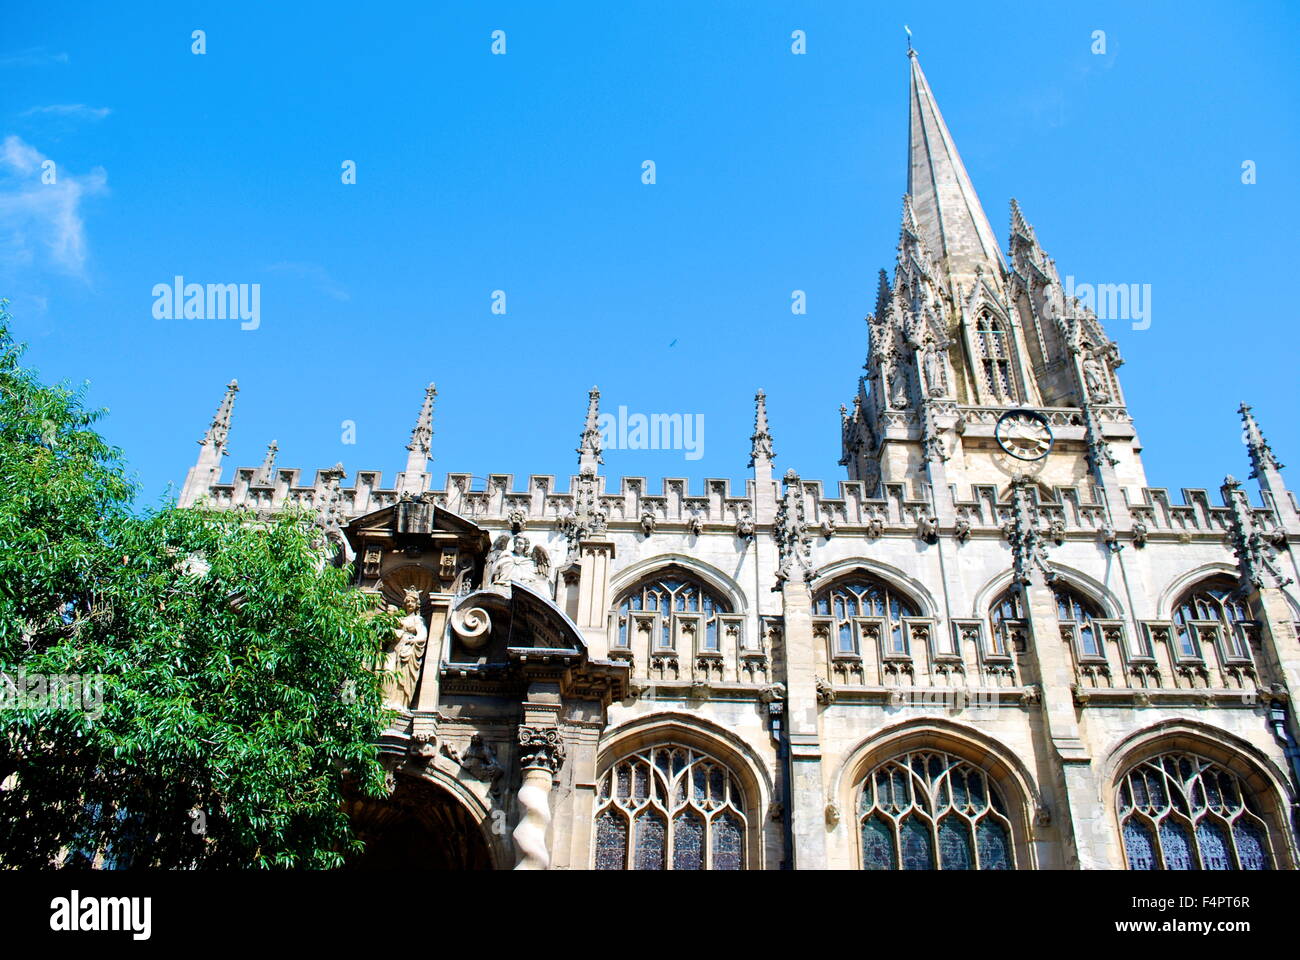 Spire of the University Church of St Mary the Virgin. Oxford Stock Photo